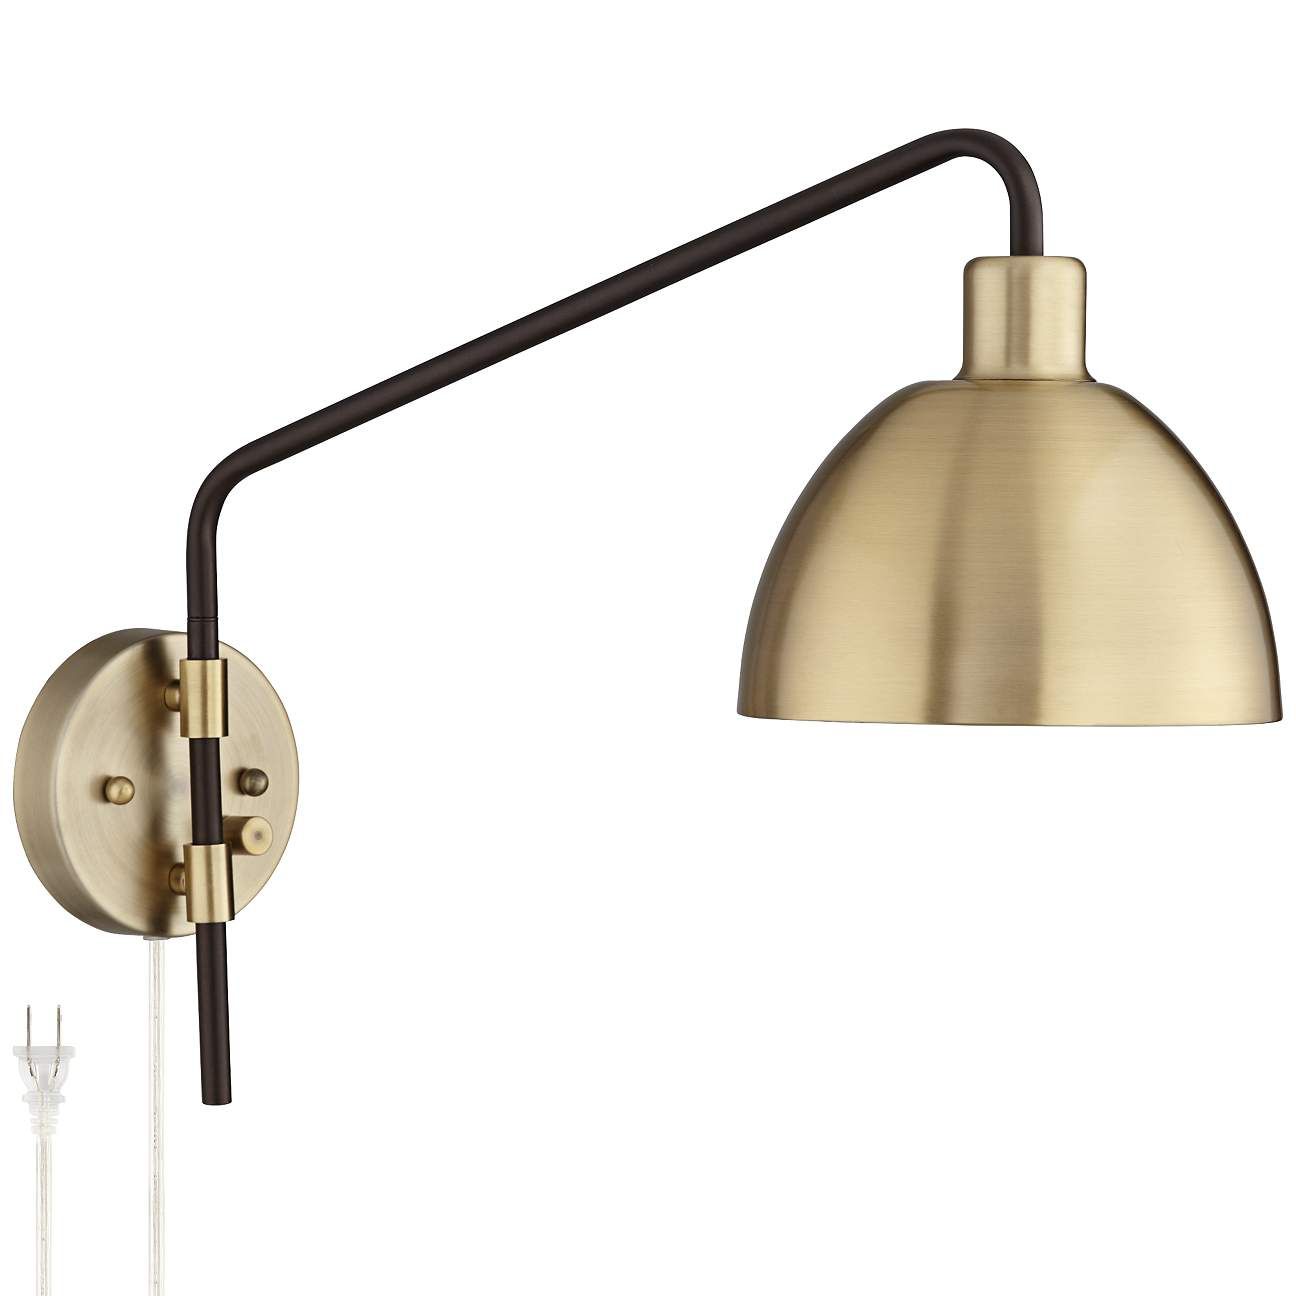 Colwood Antique Brass and Bronze Plug-In Swing Arm Wall Lamp | LampsPlus.com